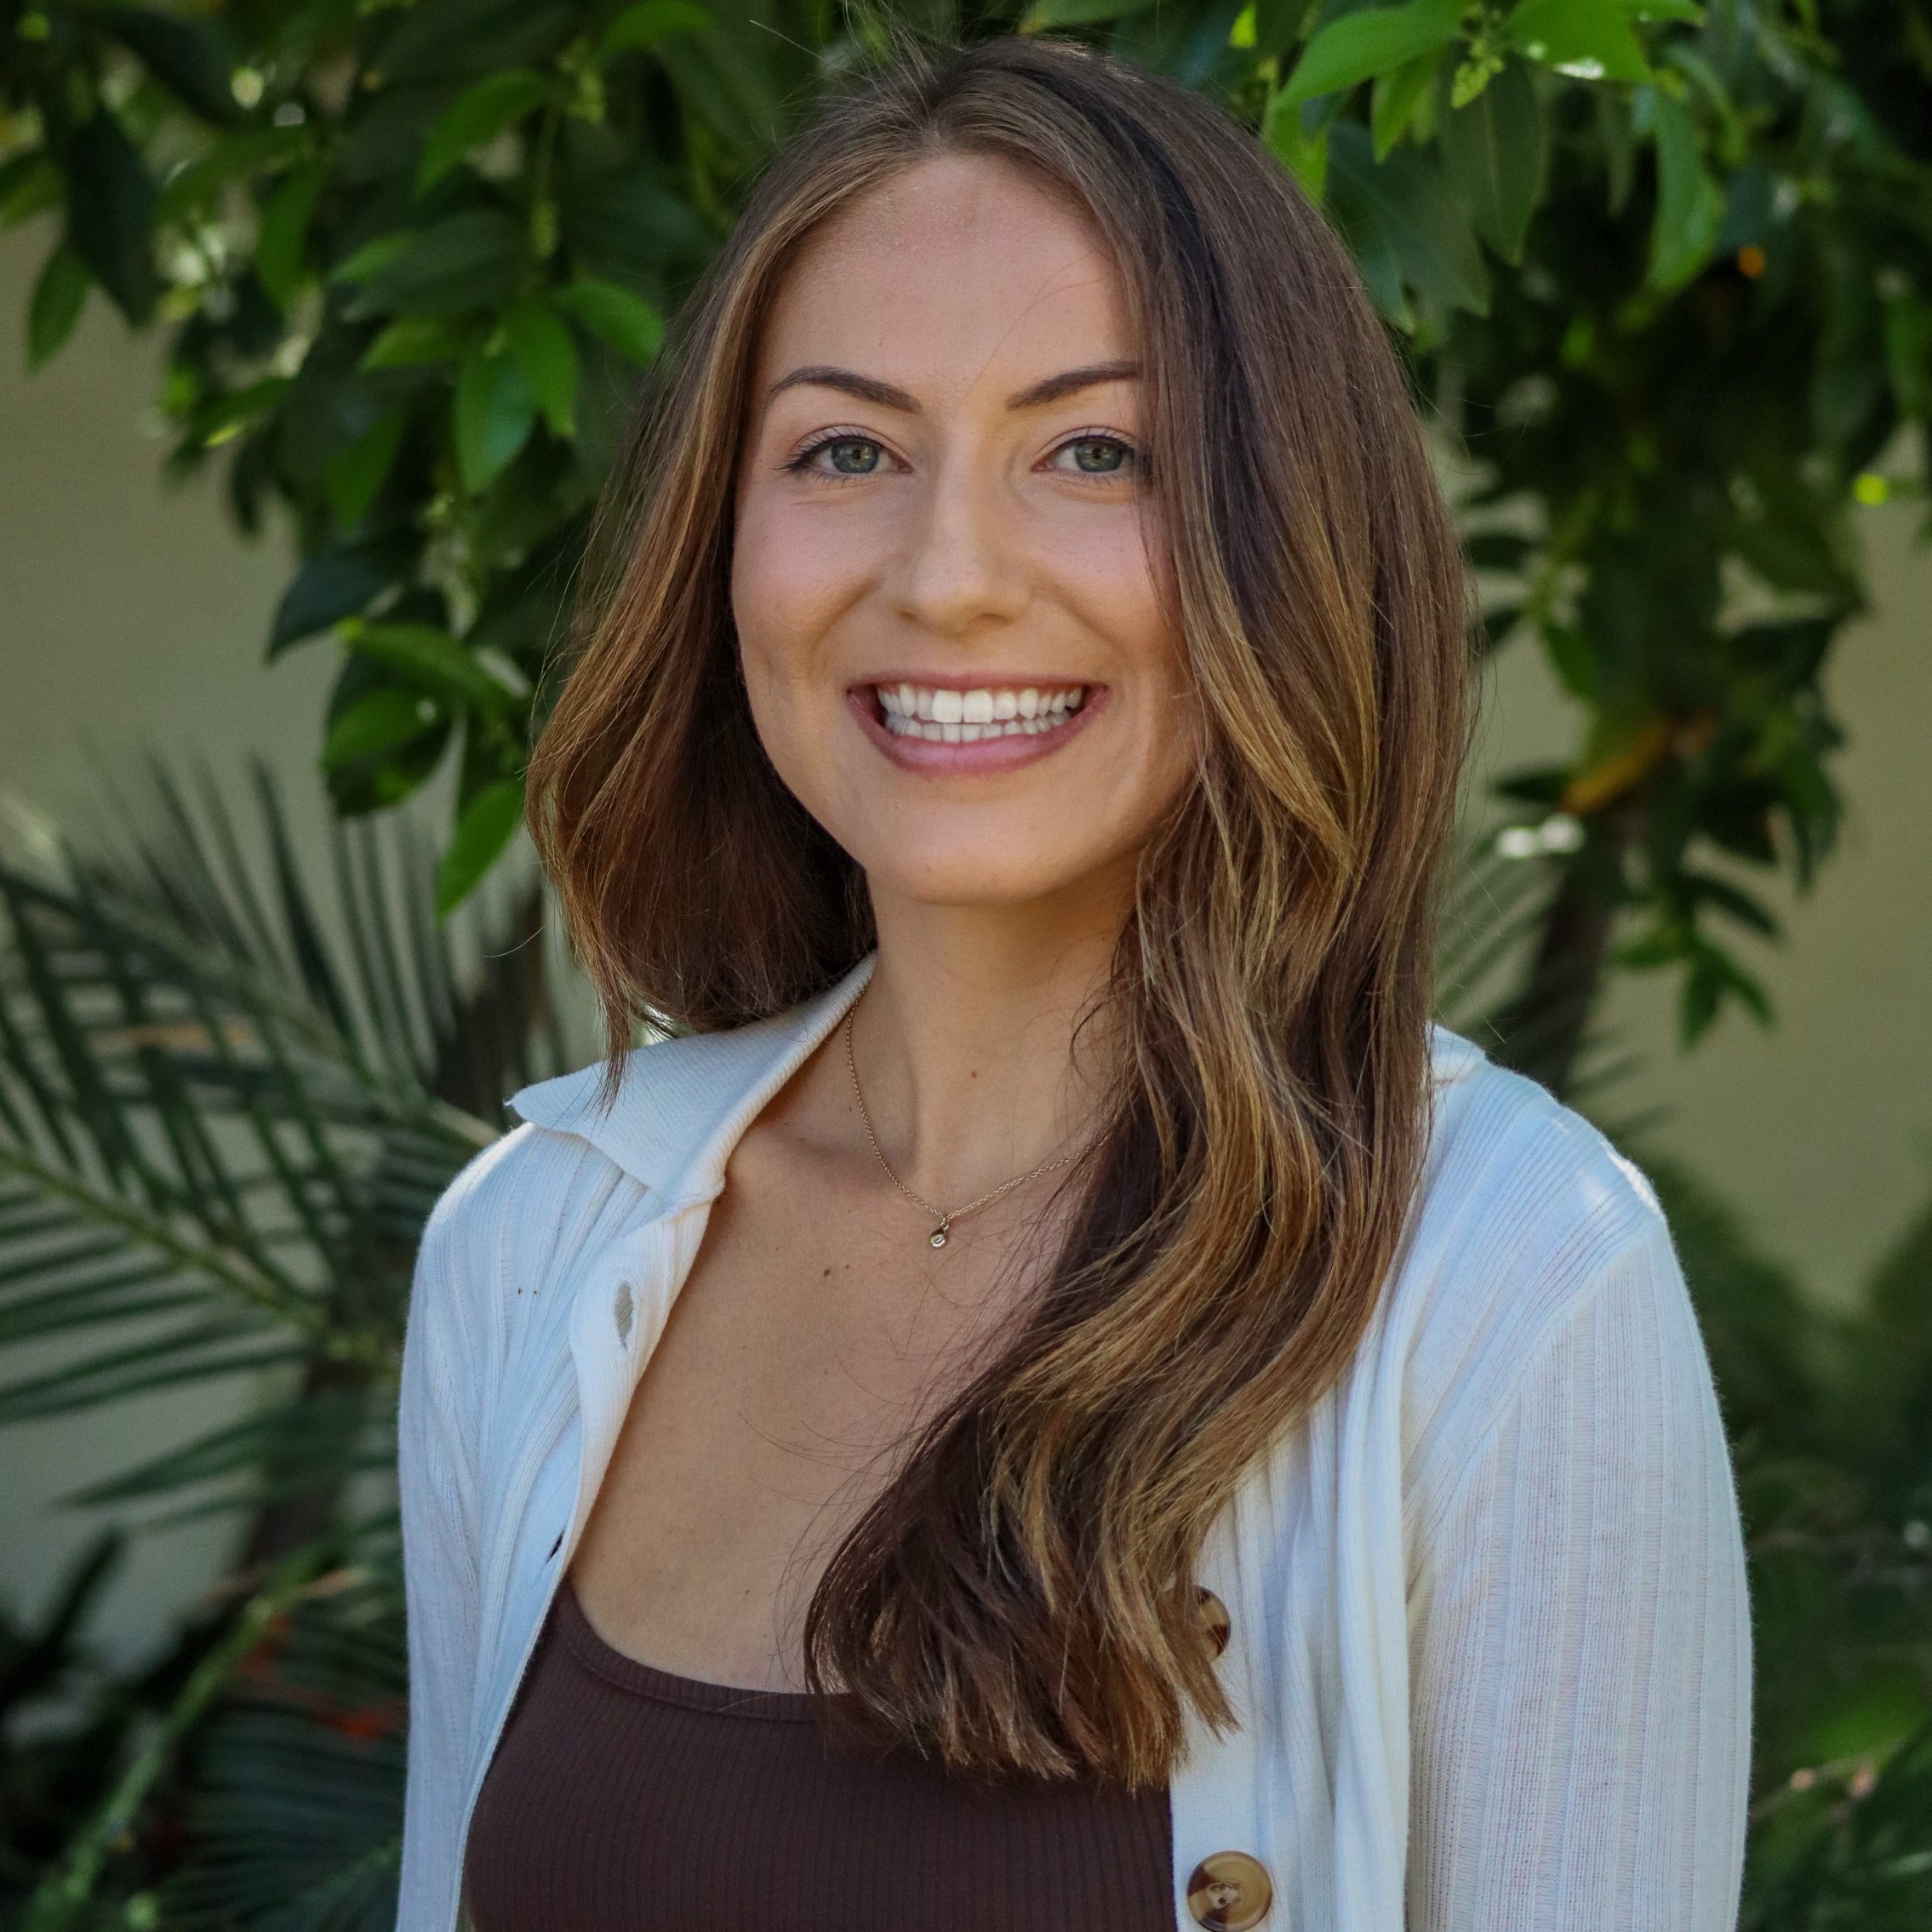 Headshot of lead clinical interviewer Lauren in a brown shirt with a white cardigan